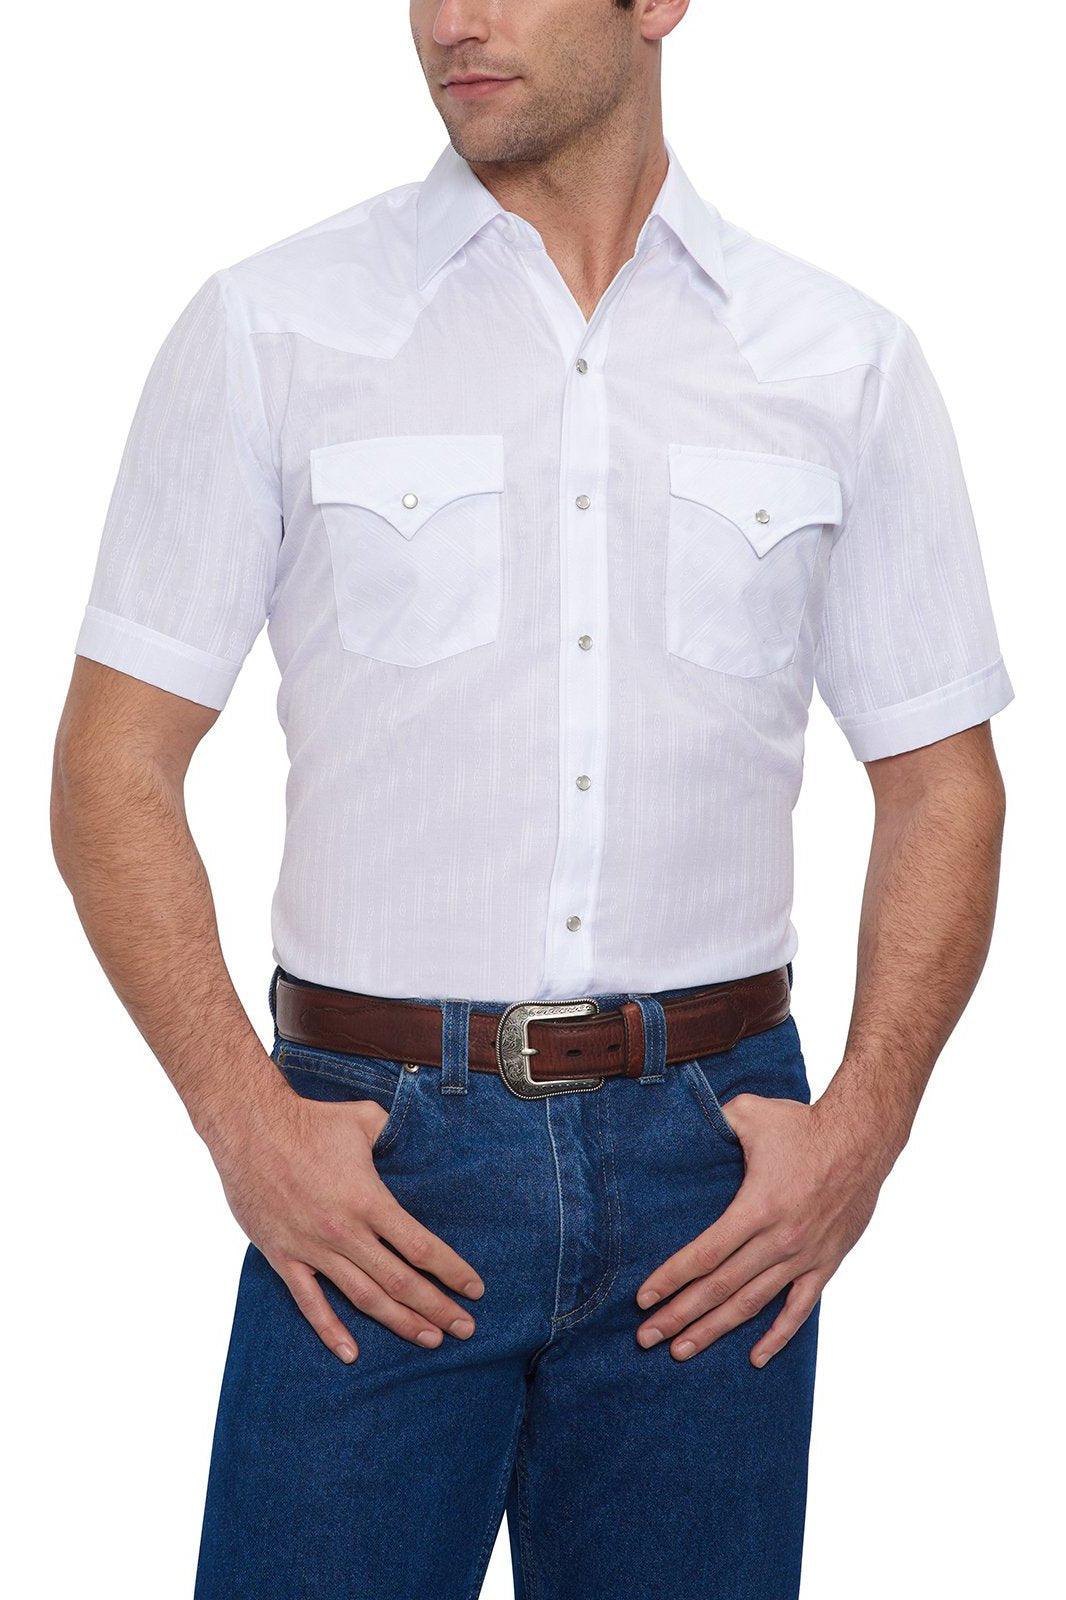 Ely Cattleman Mens S/S White Tone On Tone Snap Shirt - Flyclothing LLC